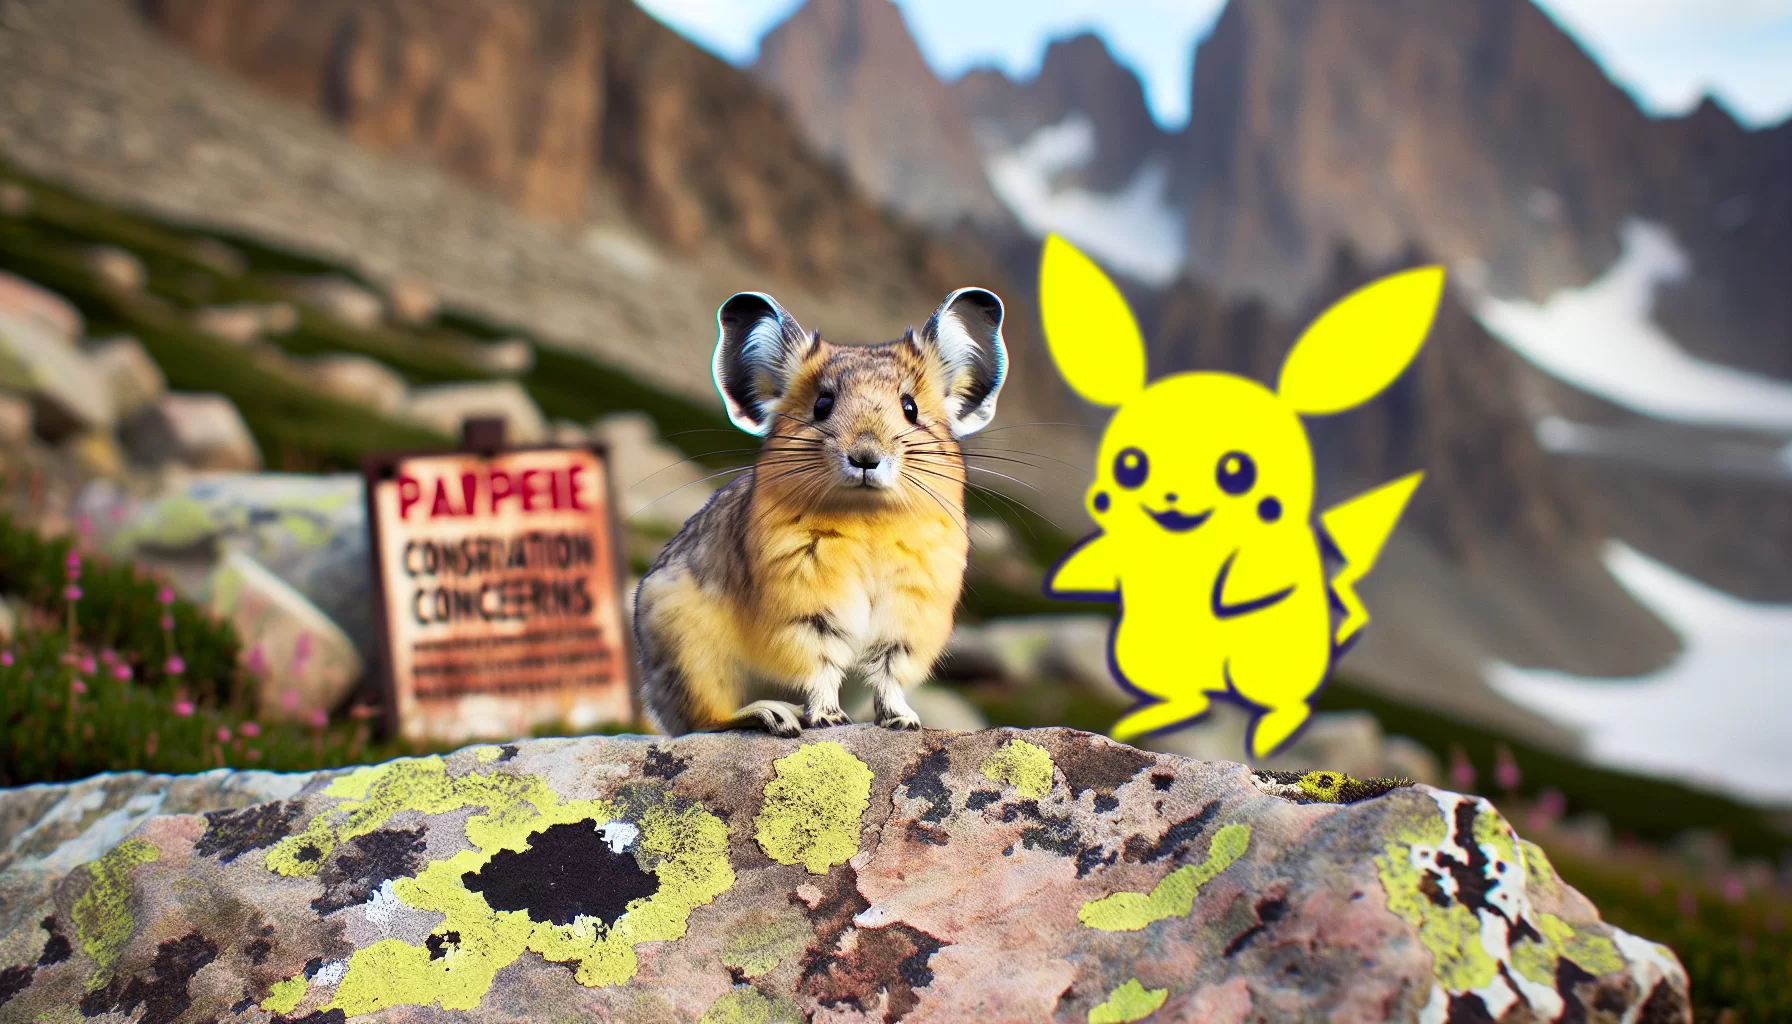 Discovering the real-life inspiration for Pikachu: the role of pikas in pop culture and conservation concerns